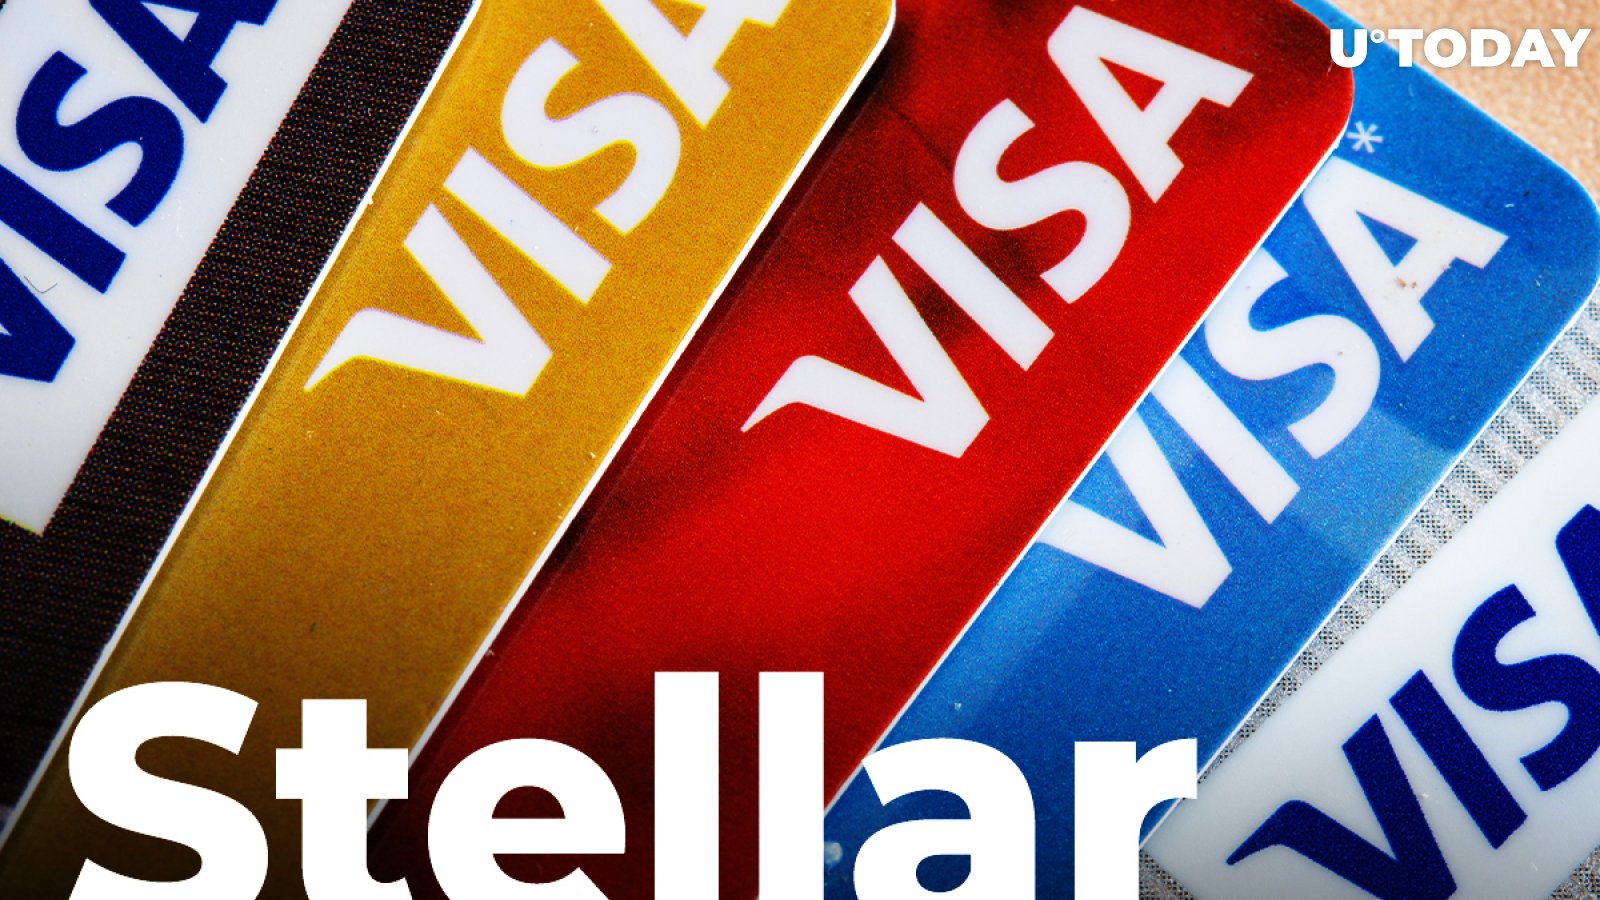 Stellar and Visa Join Forces with Fintech Startup to Bank the Unbanked